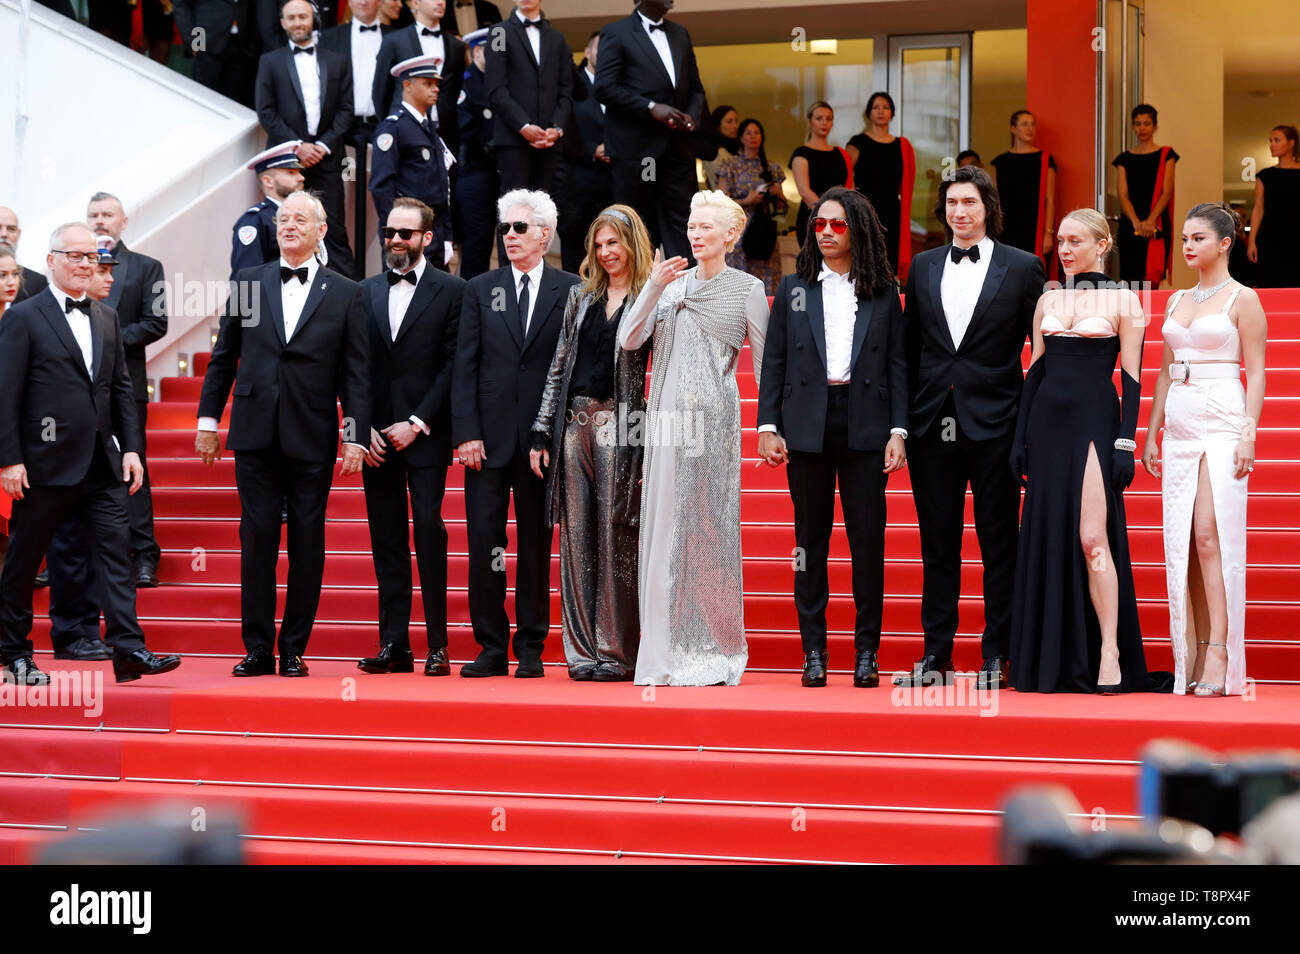 Cannes, France. 14th May, 2019. Thierry Fremaux, Bill Murray, Carter Logan, Jim Jarmusch, Sara Driver, Tilda Swinton, Luka Sabbat, Adam Driver, Chloe Sevigny and Selena Gomez attending the opening ceremony and screening of 'The Dead Don't Die' during the 72nd Cannes Film Festival at the Palais des Festivals on May 14, 2019 in Cannes, France Credit: Geisler-Fotopress GmbH/Alamy Live News Stock Photo